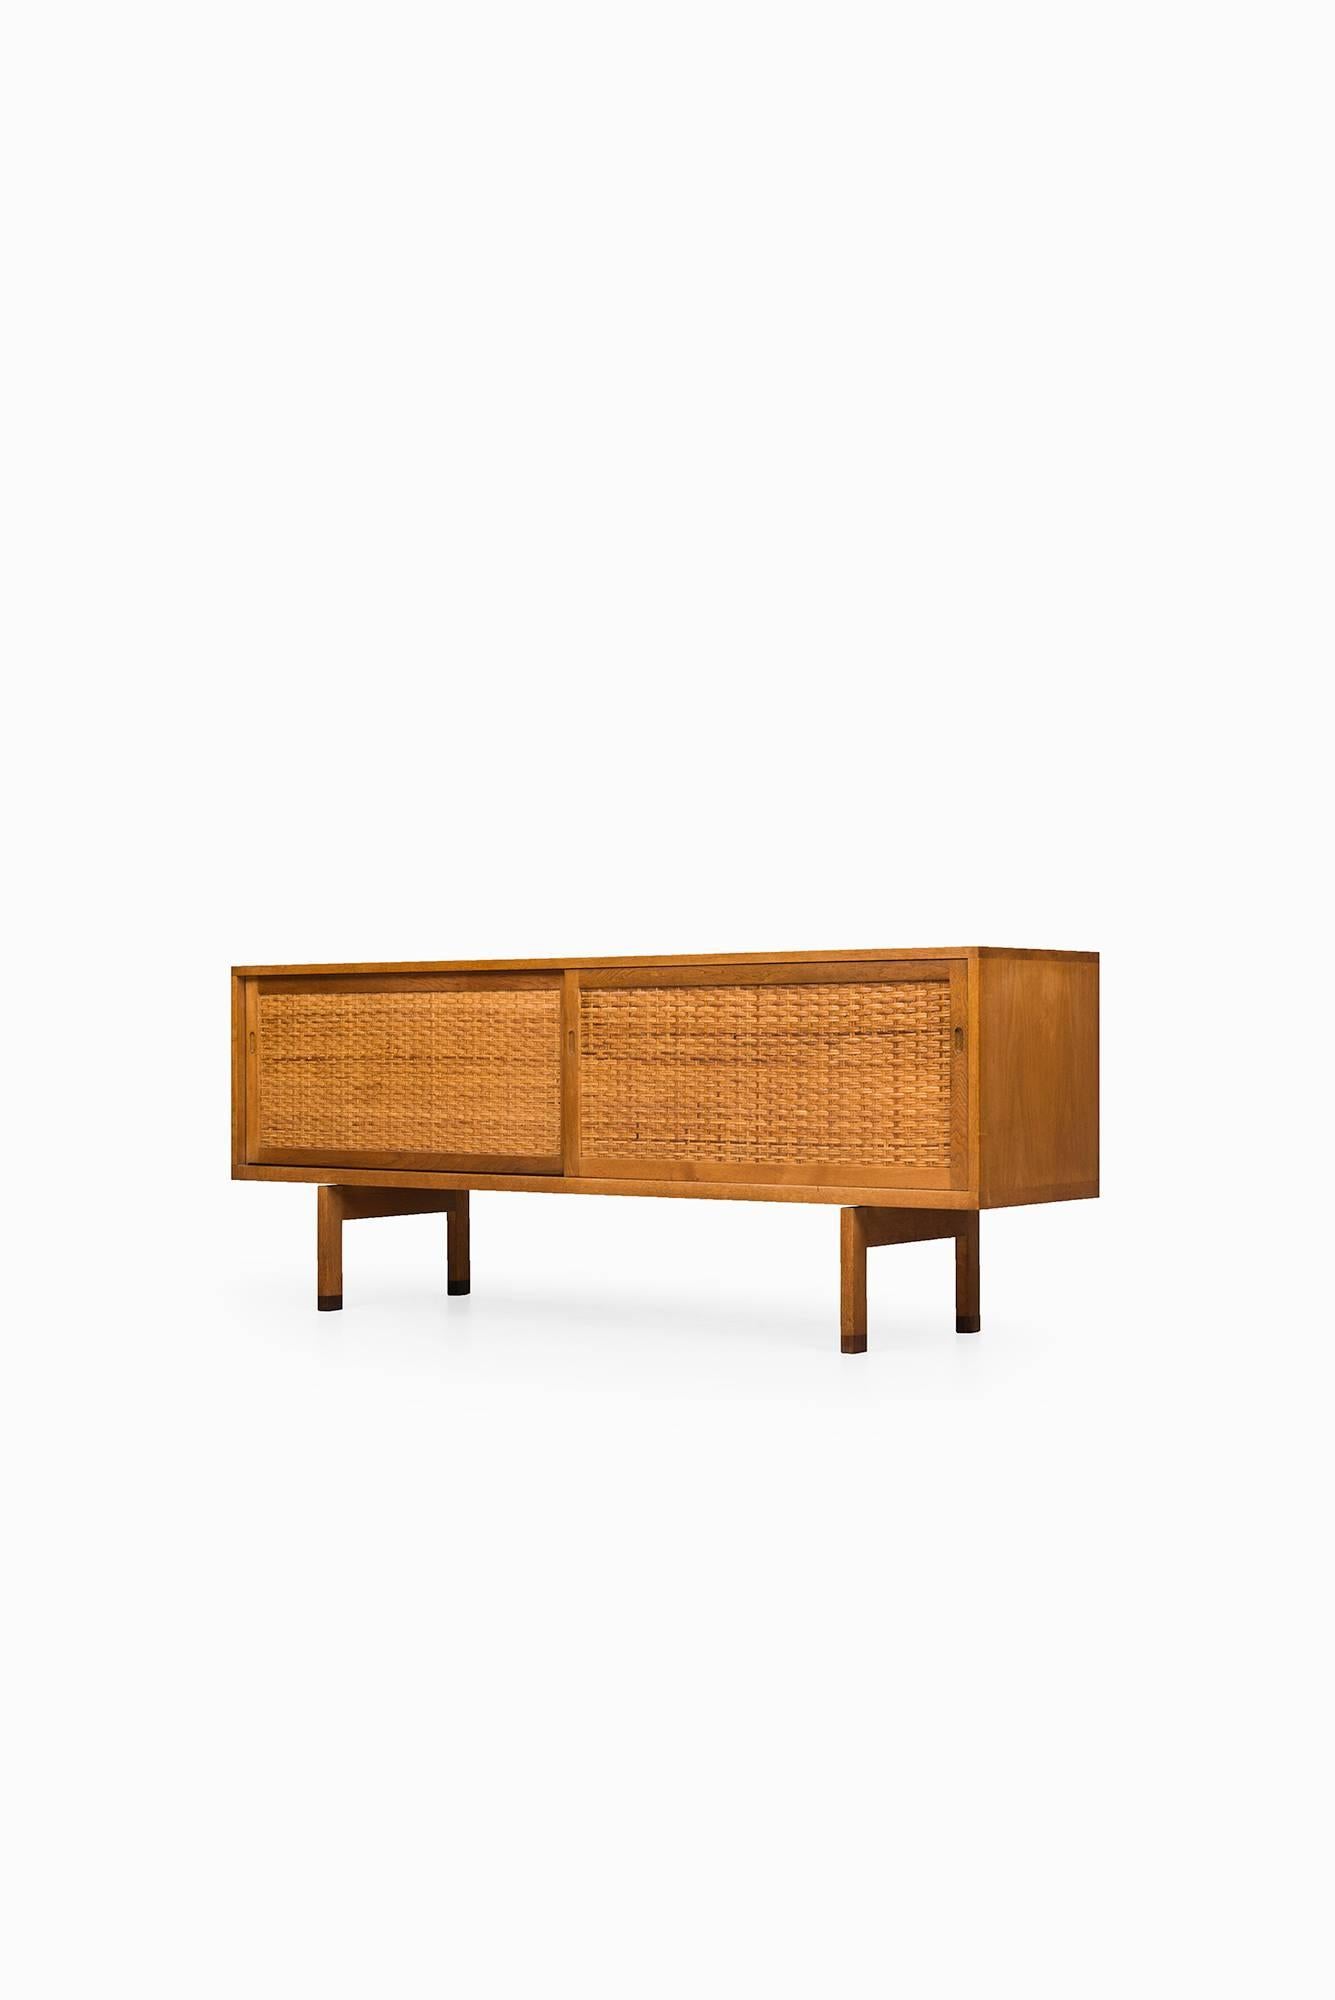 Very rare sideboard in oak with woven cane and rosewood feet designed by Hans Wegner. Produced by Ry møbler in Denmark.
